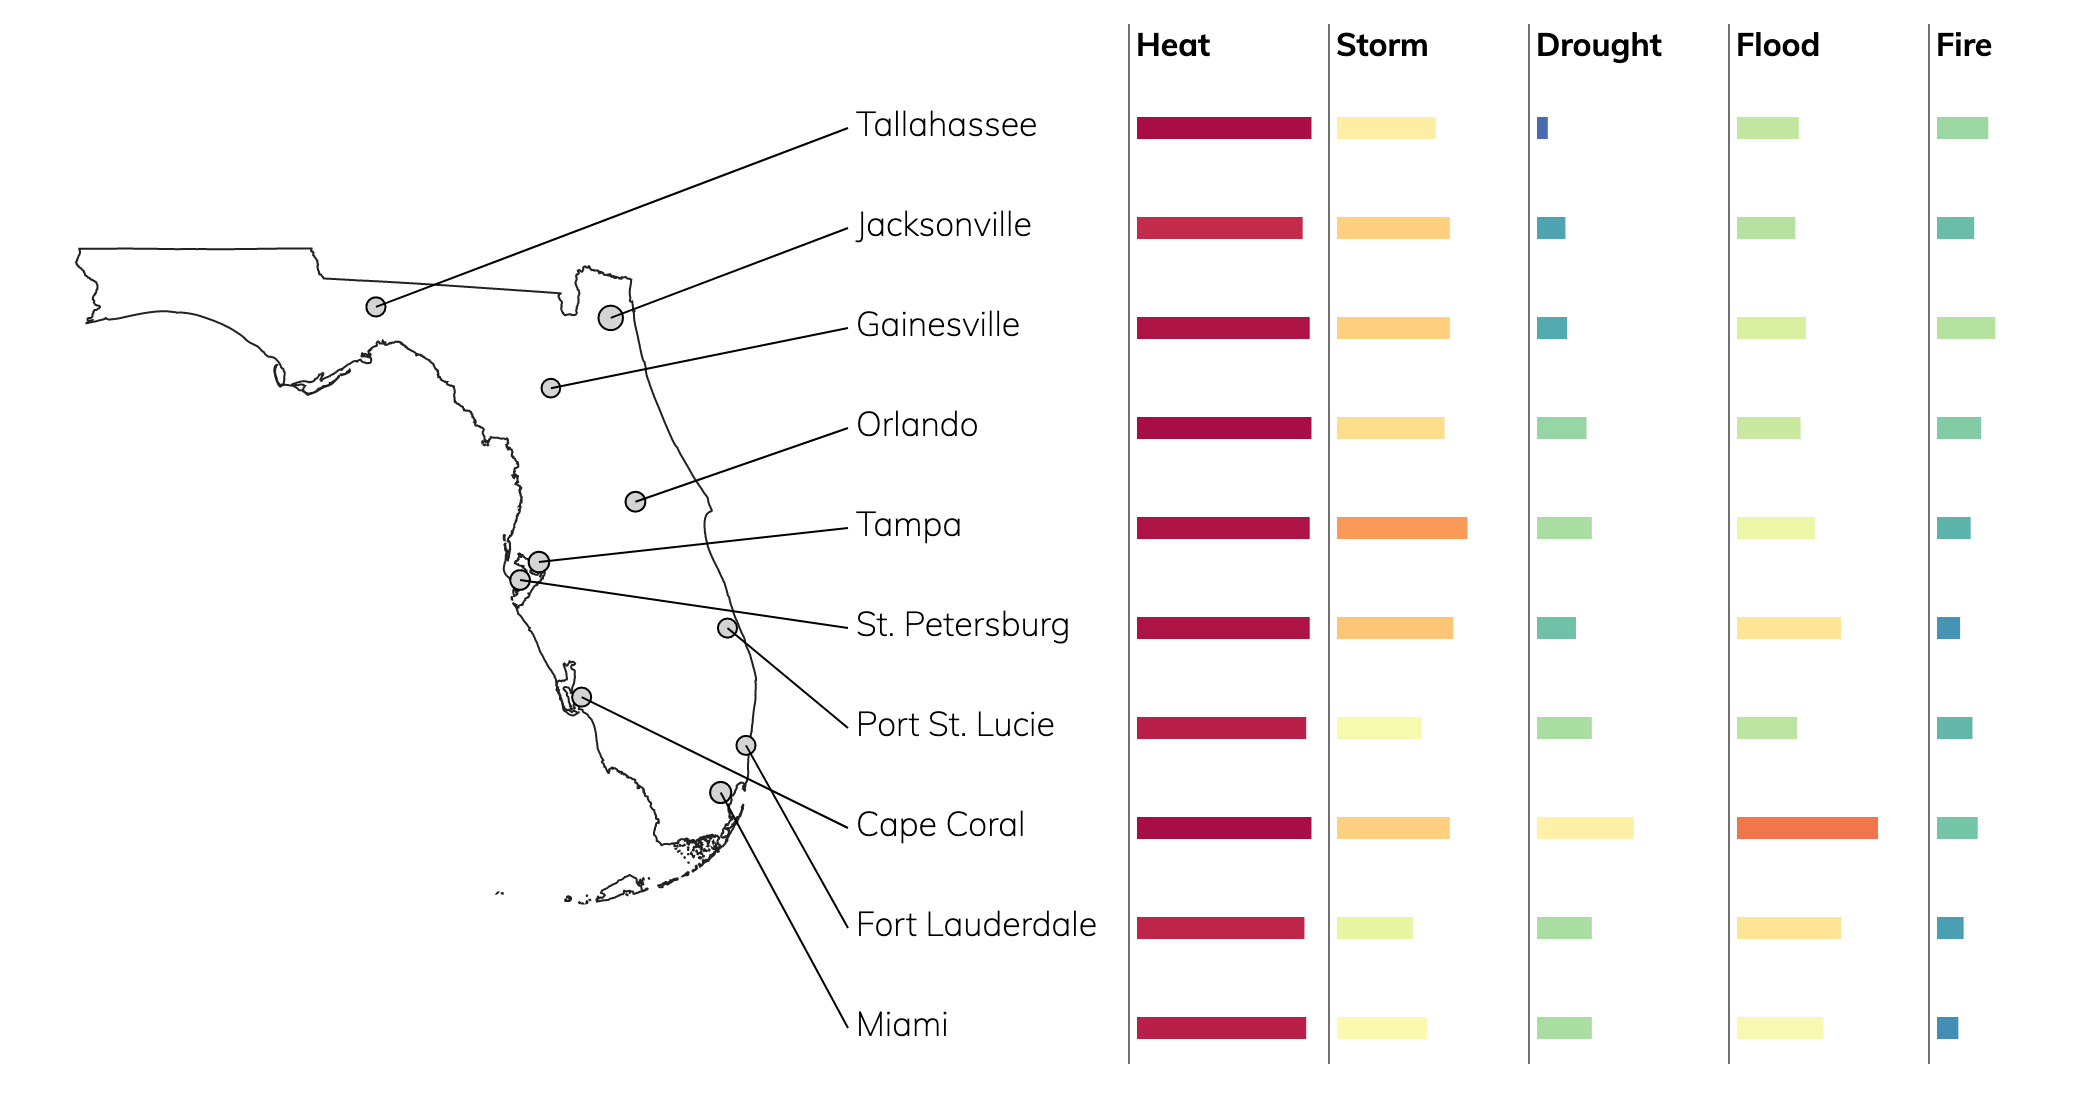 Climate Change Risk Ratings for Cities in Florida